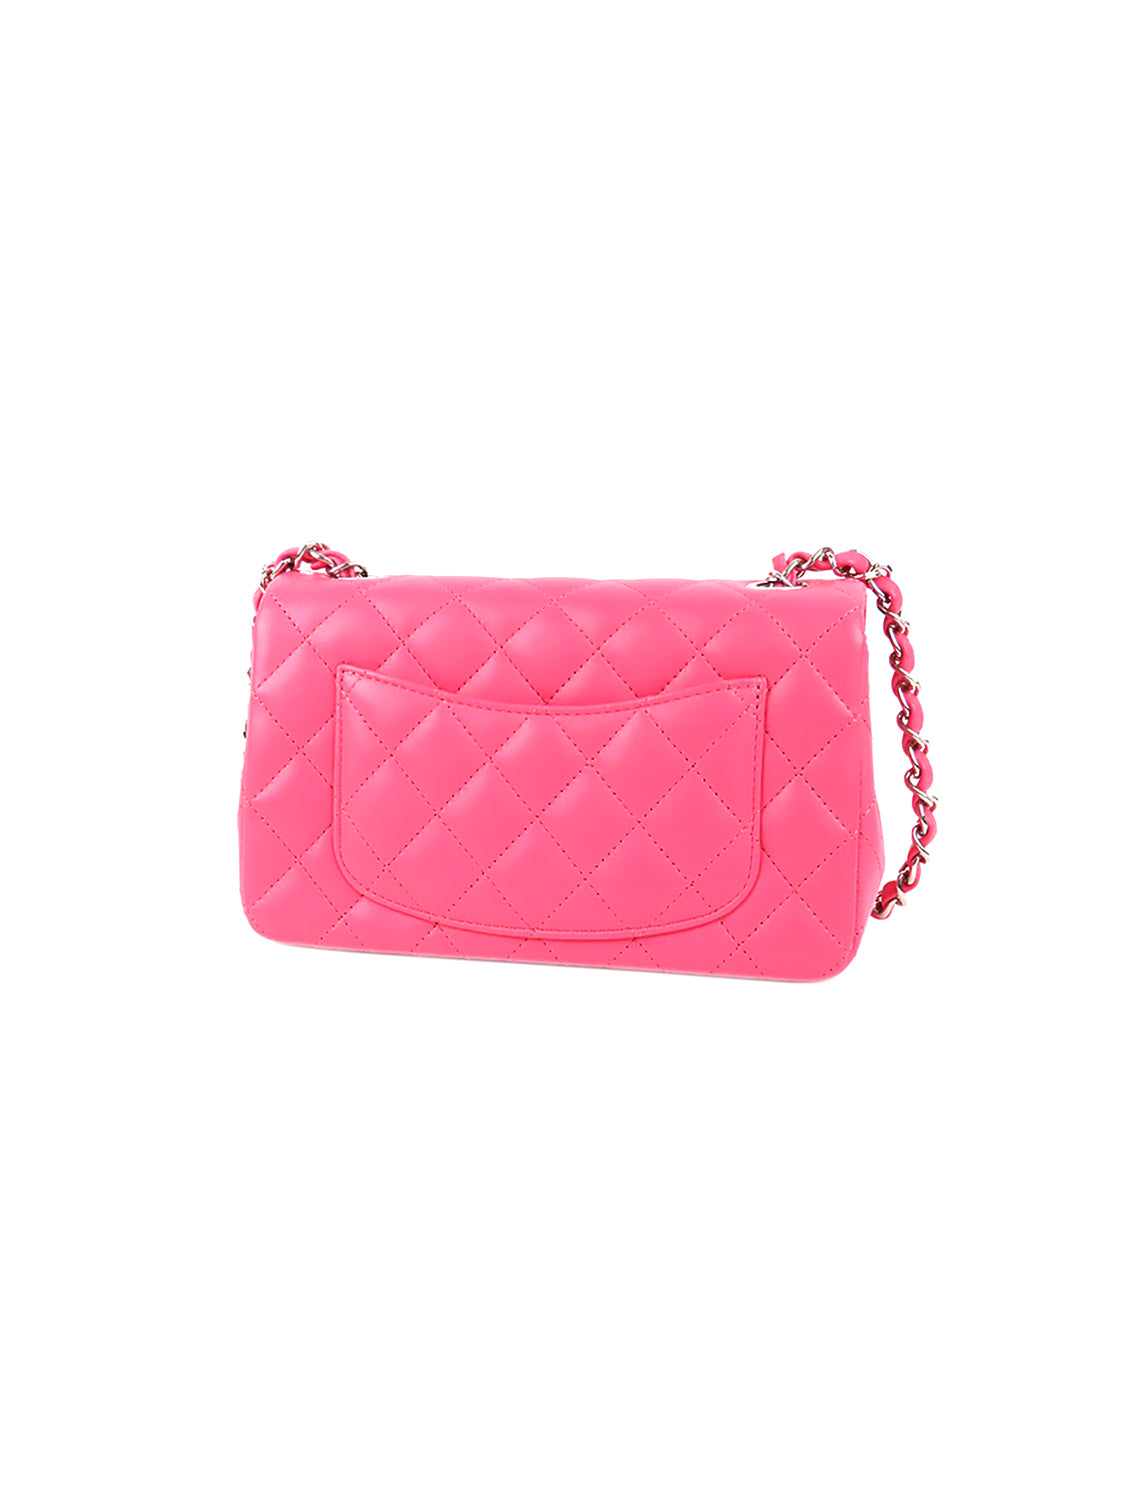 Chanel Pink Quilted Leather Double Carry Small Flap Bag - Yoogi's